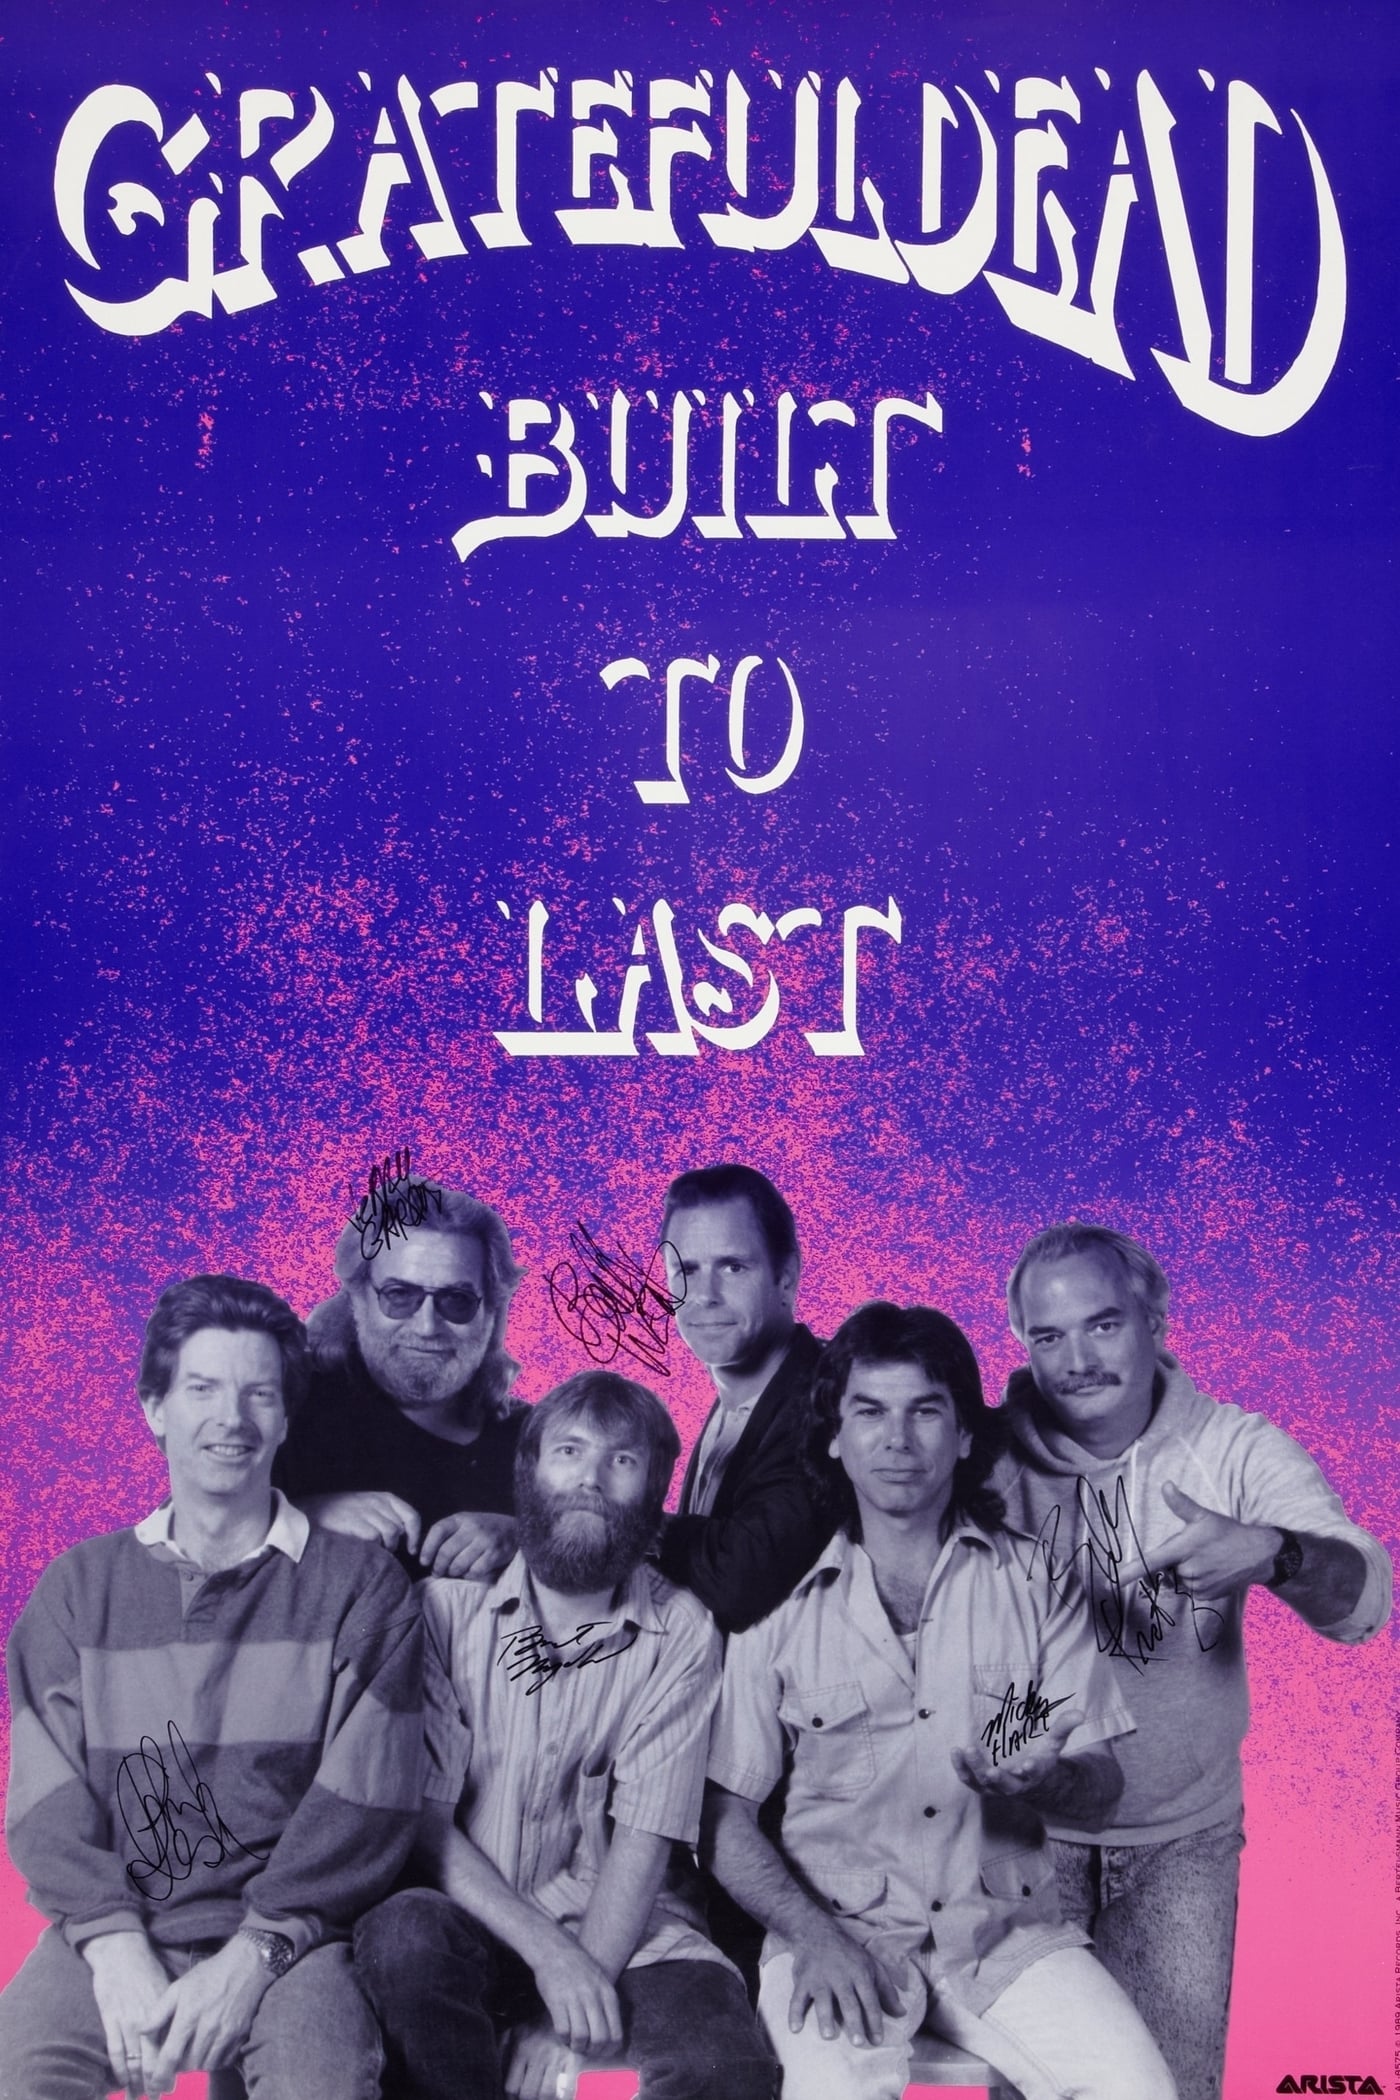 Grateful Dead: The Making of "Built to Last"